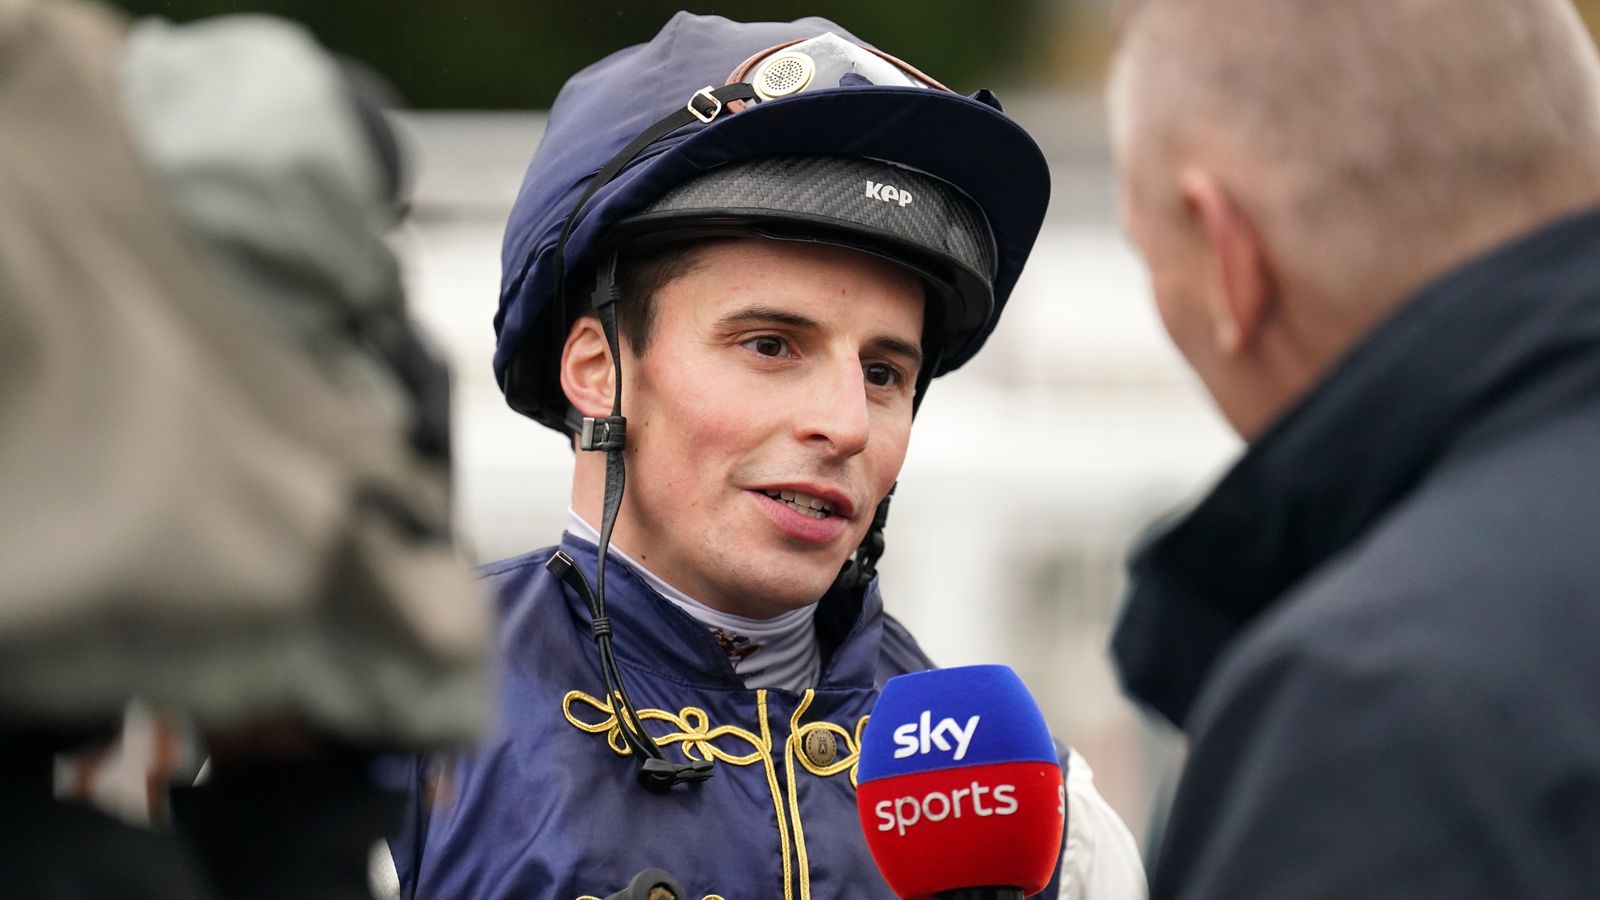 Today on Sky Sports Racing: Flat stars in focus on busy Newbury card plus Yarmouth and Worcester | Racing News